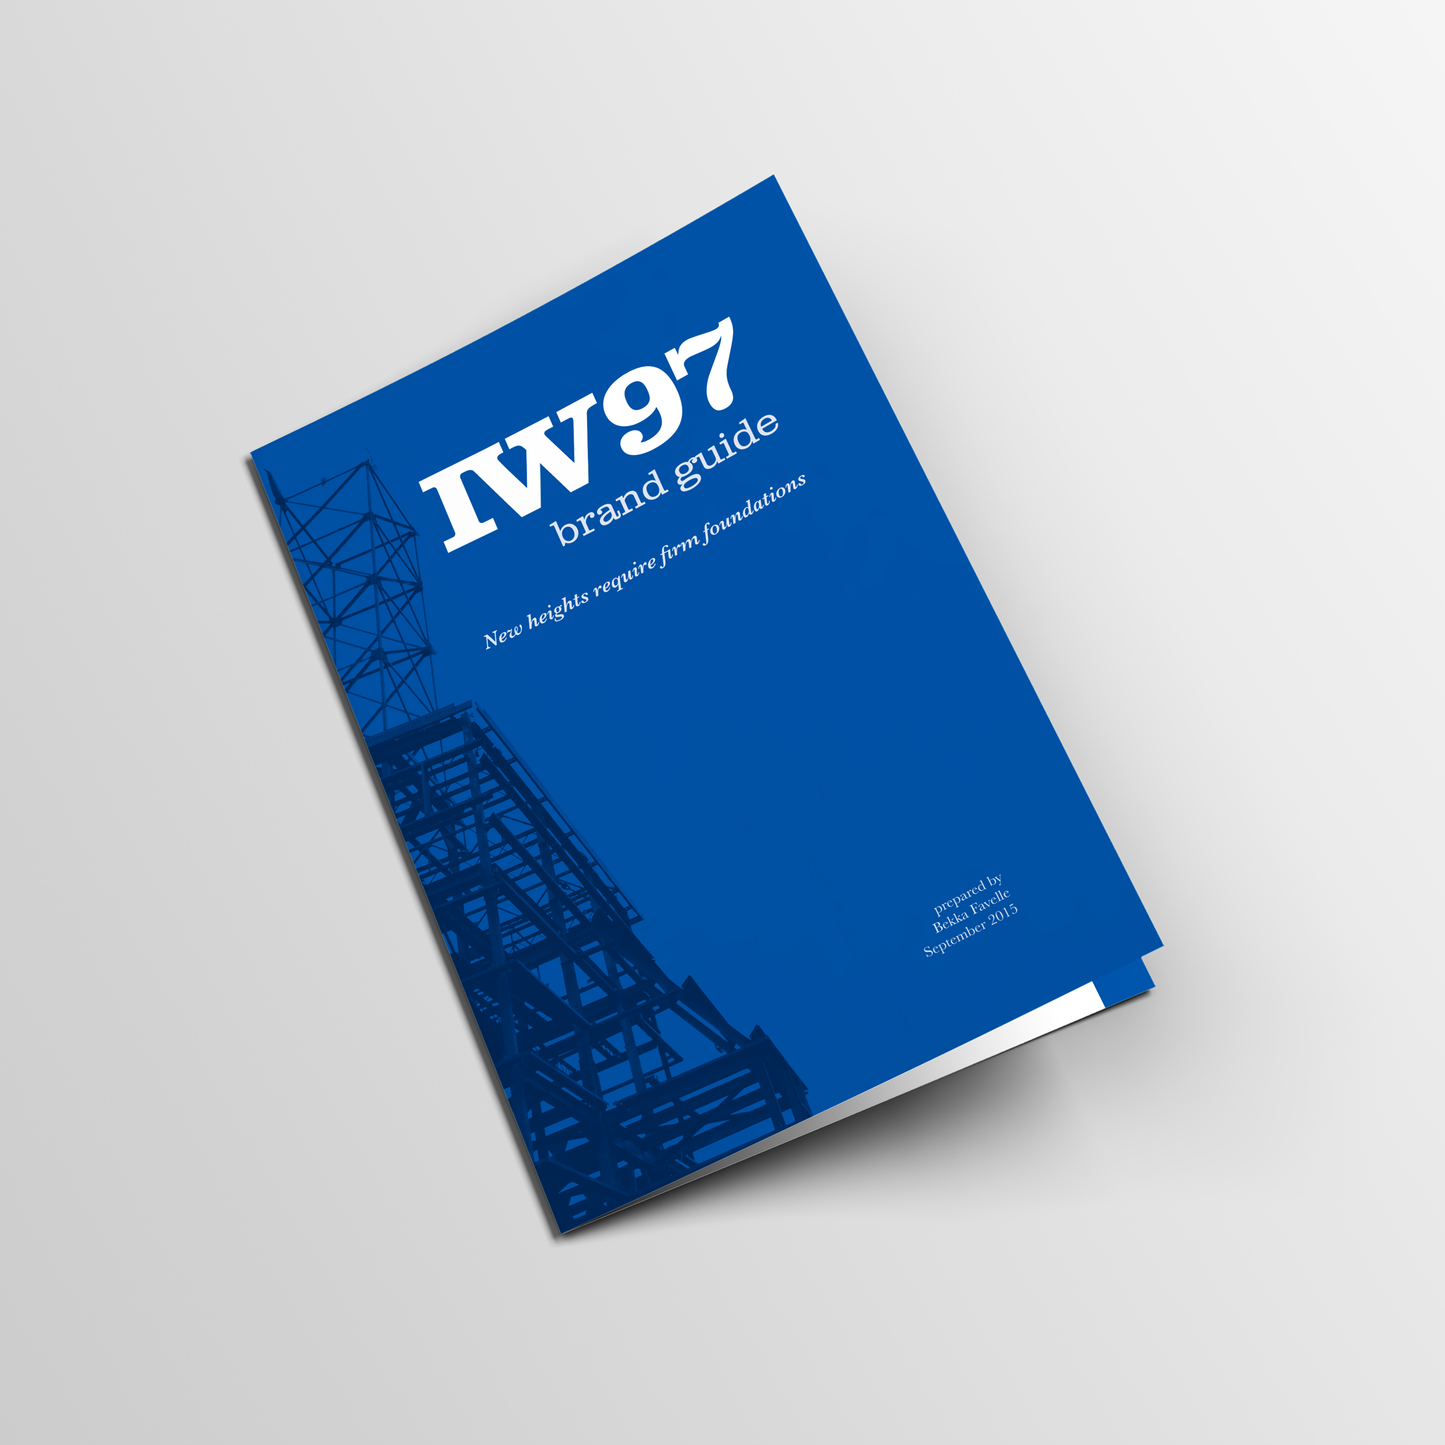 Brand guide cover mockup for IW97, ironworker union